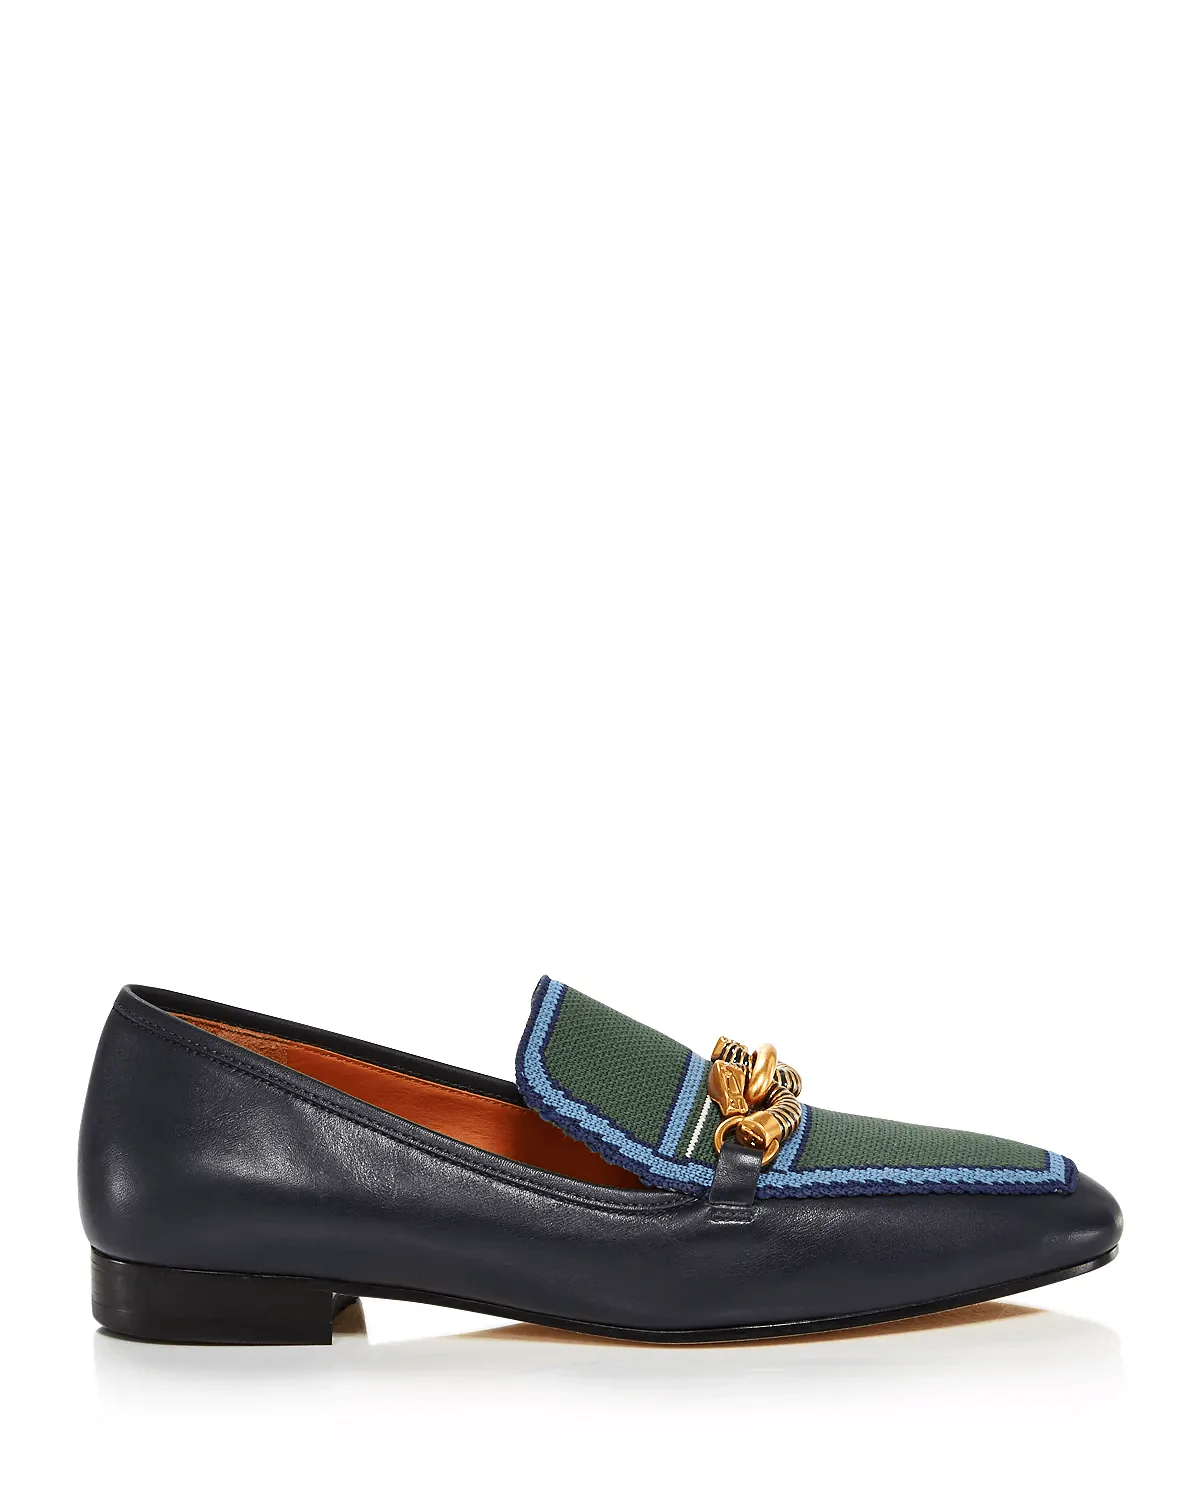 Tory Burch Jessa Pointed-Toe Embellished Loafers